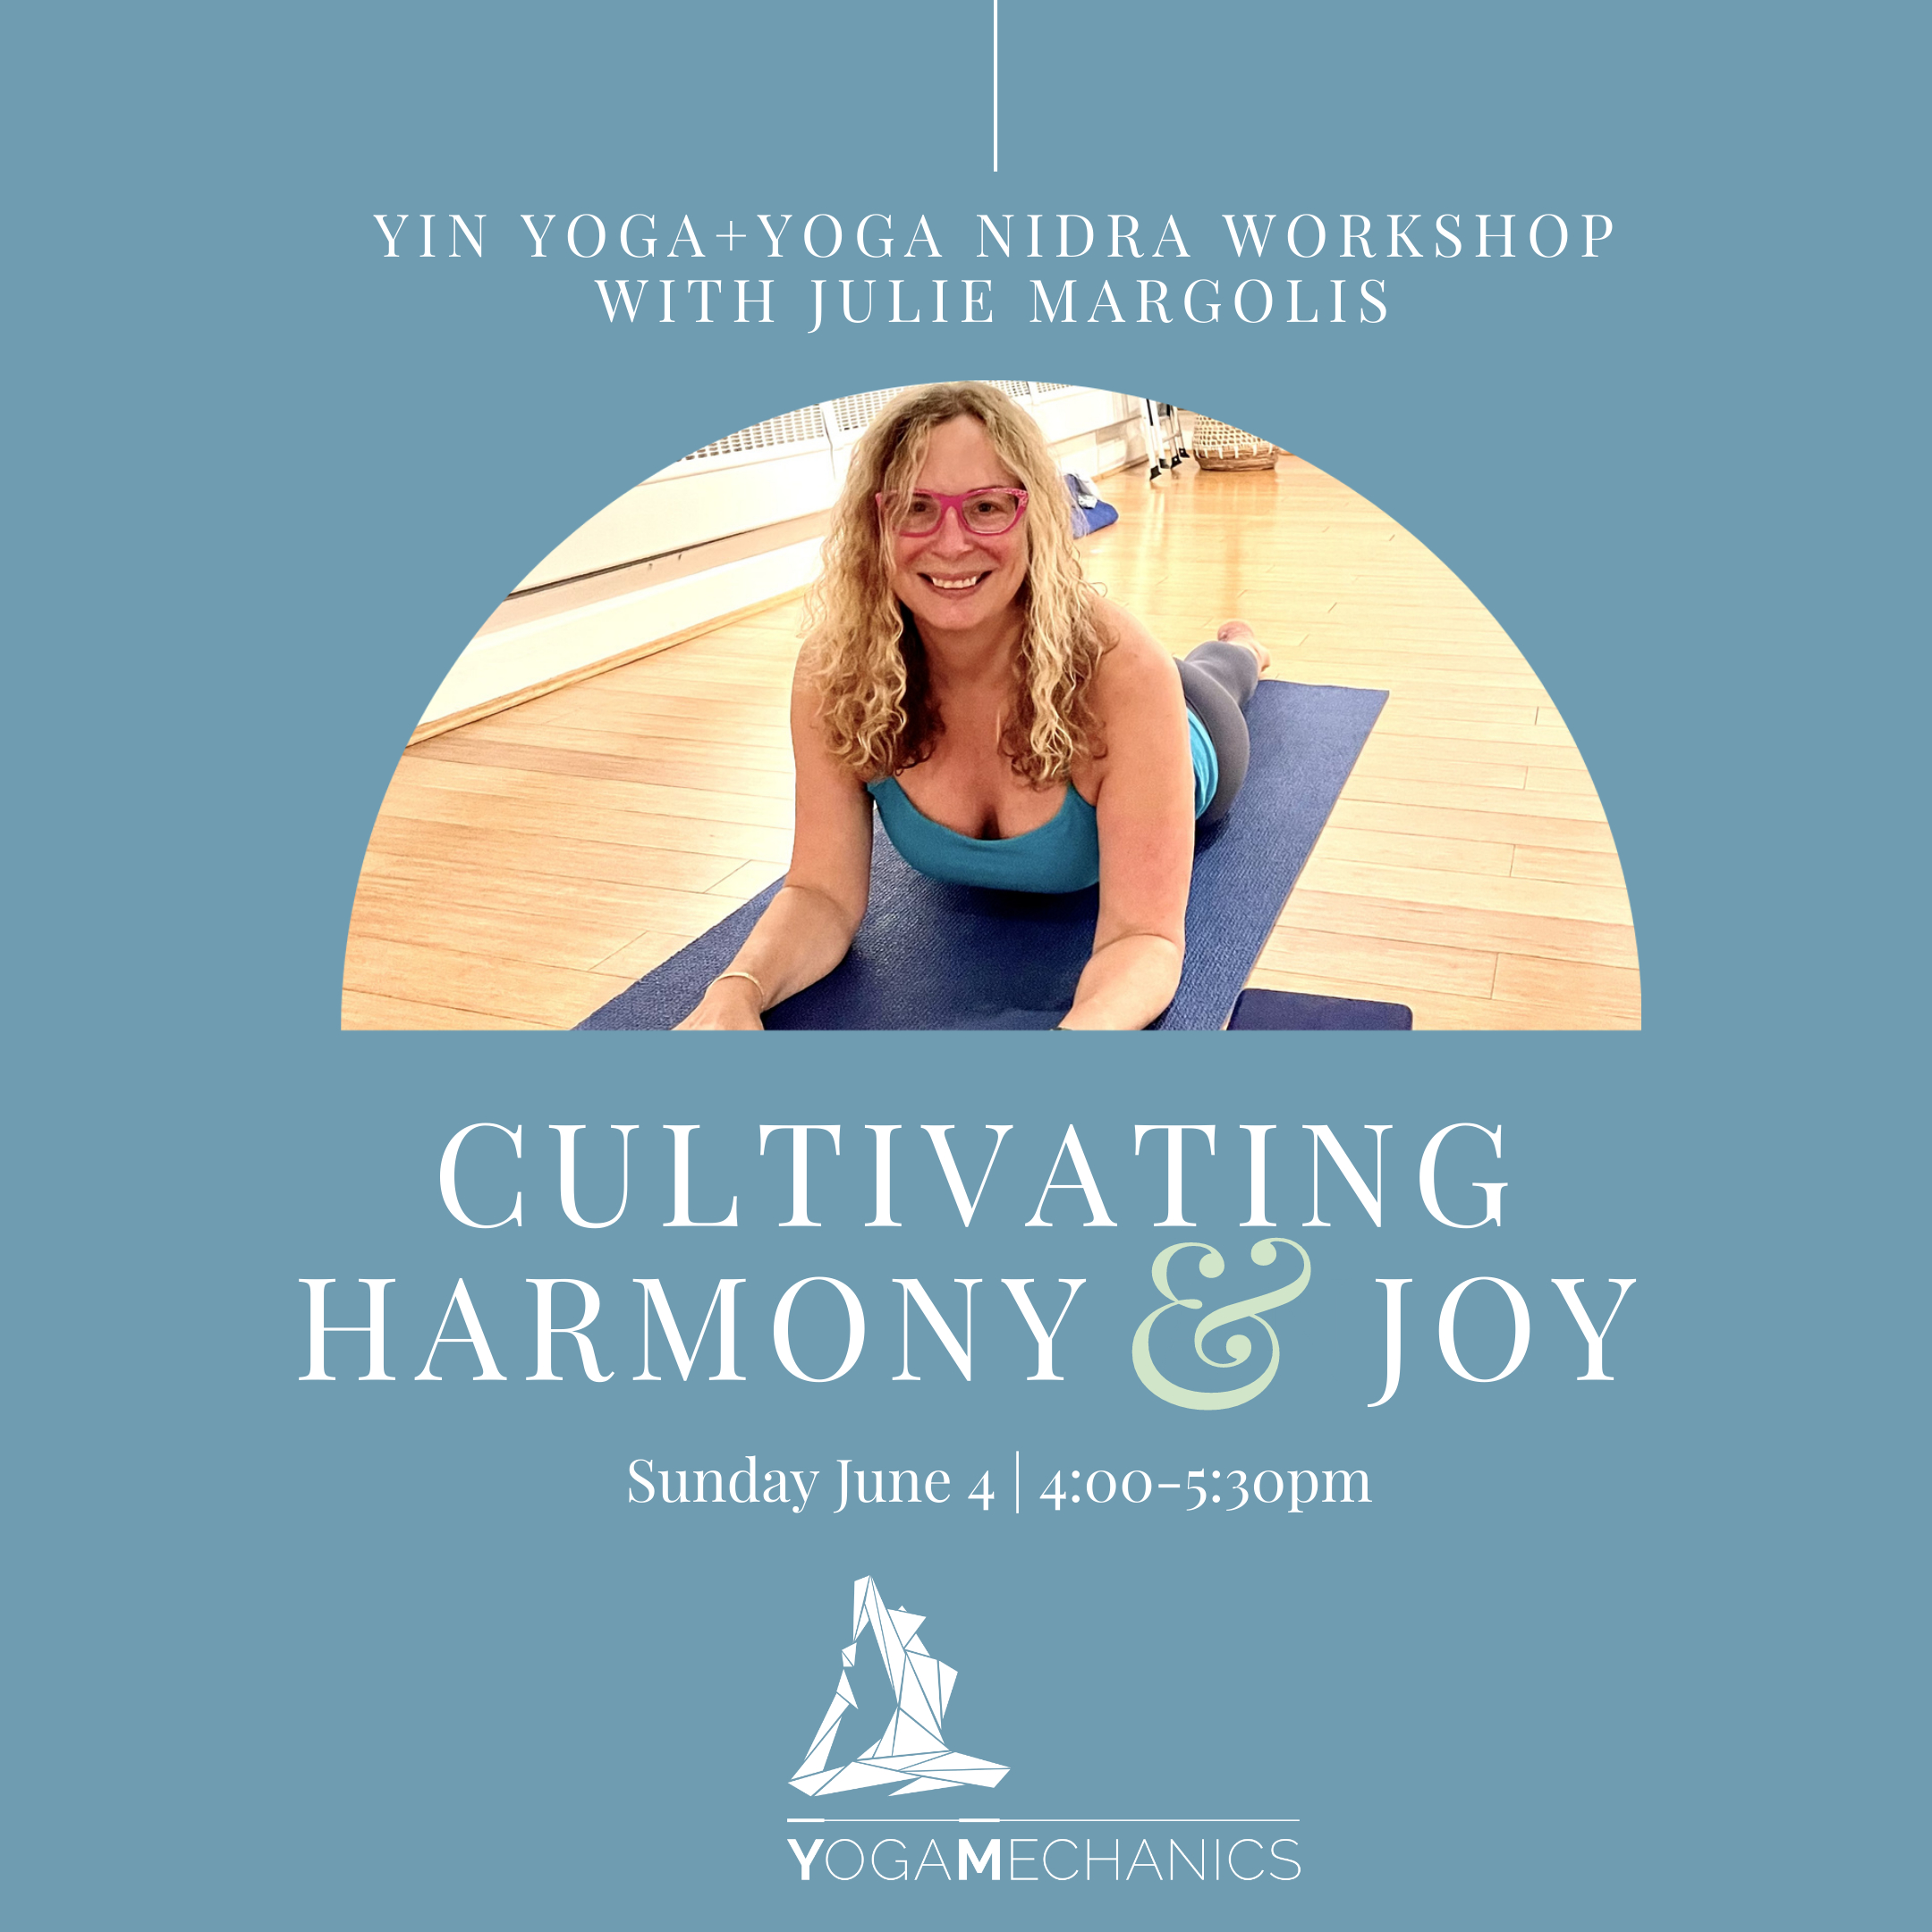 An Early Summer Yin and Nidra Workshop: Cultivating Harmony and Joy,